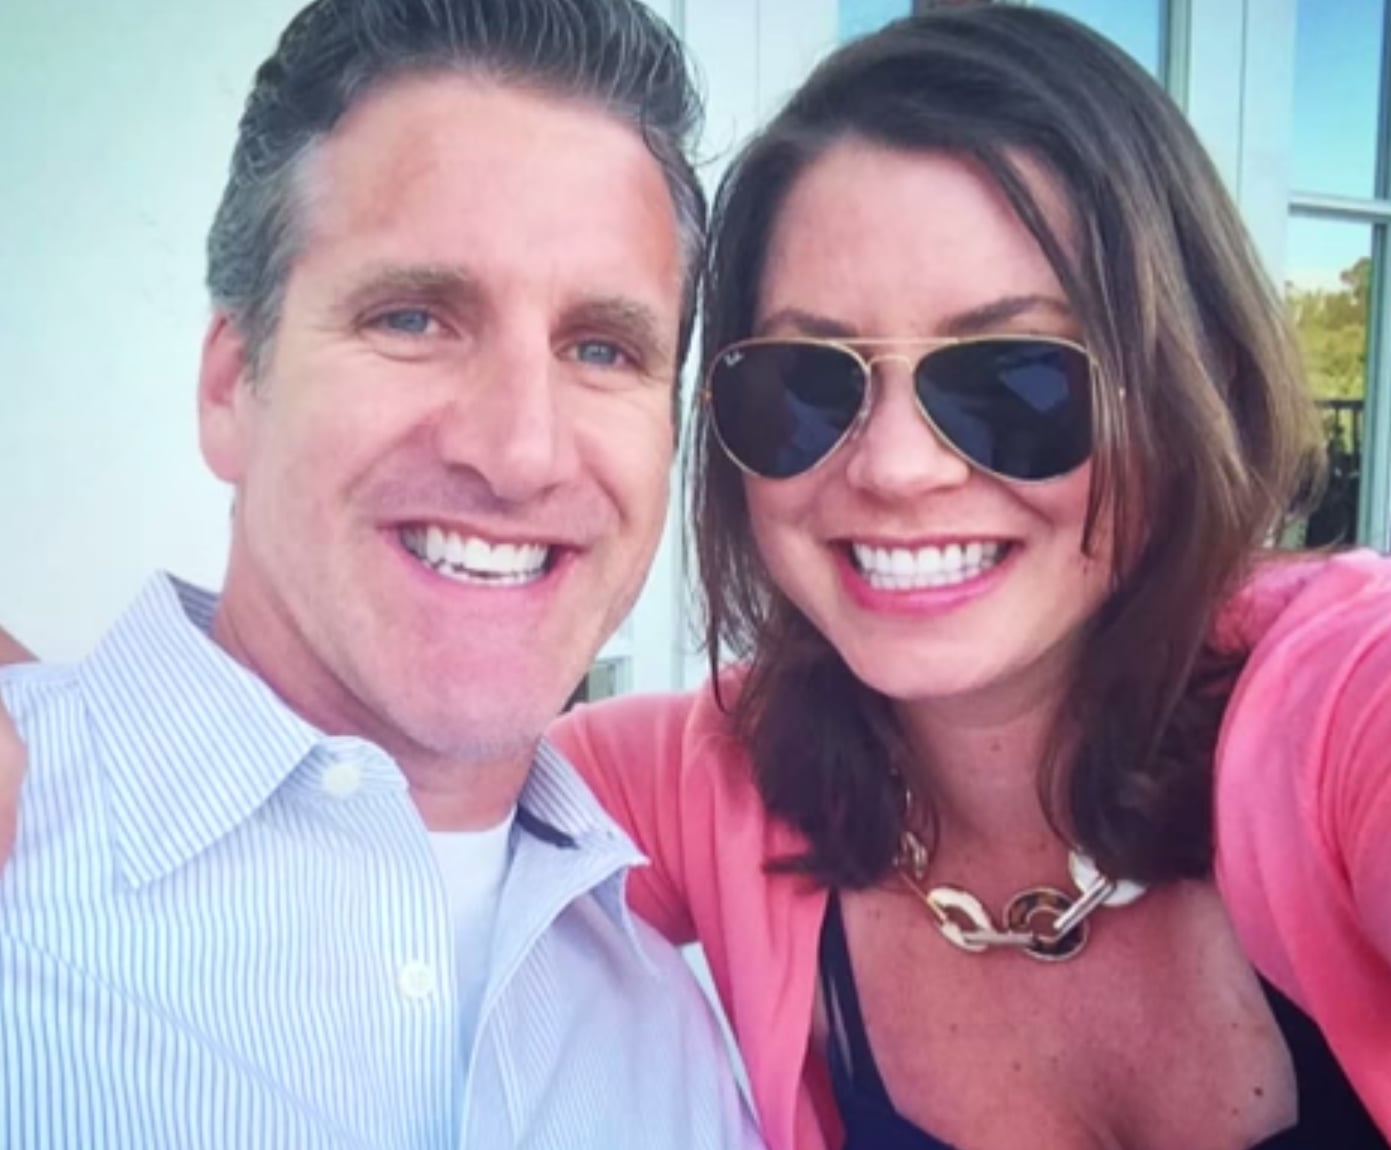 Brittany Maynard S Husband Speaks Out In Interview Popsugar Love And Sex